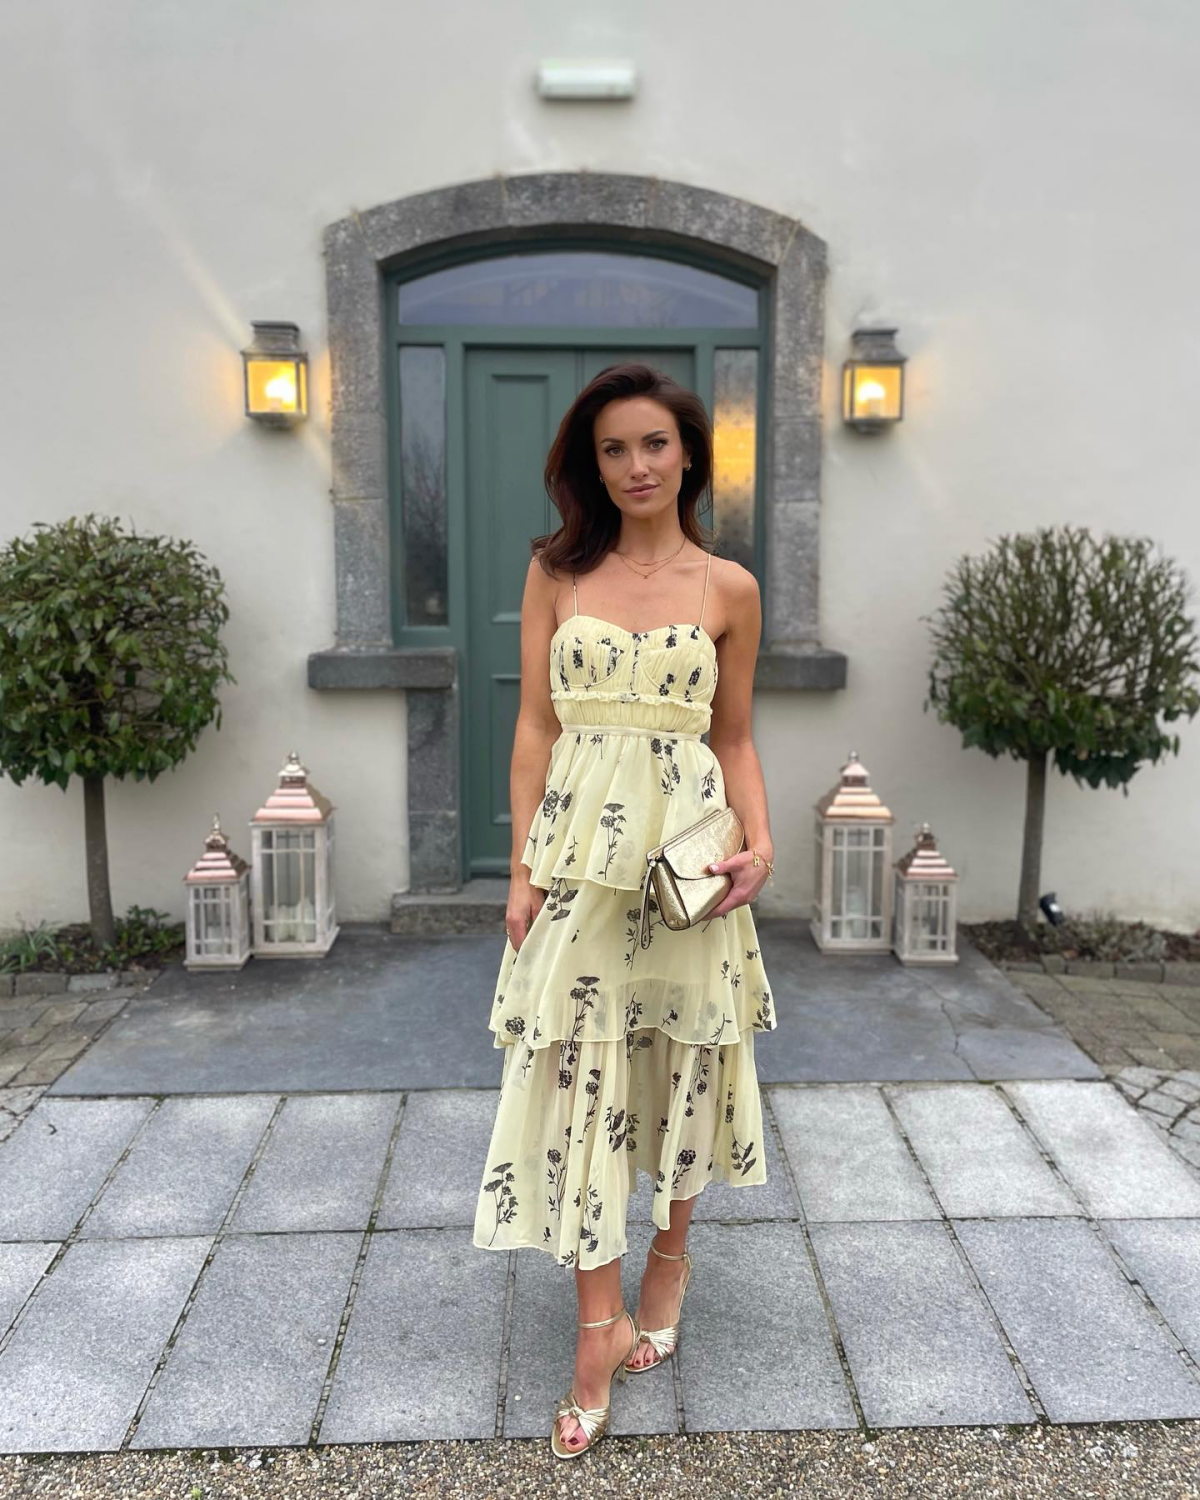 A Fashion Guide: What To Wear To An Engagement Party As A Guest